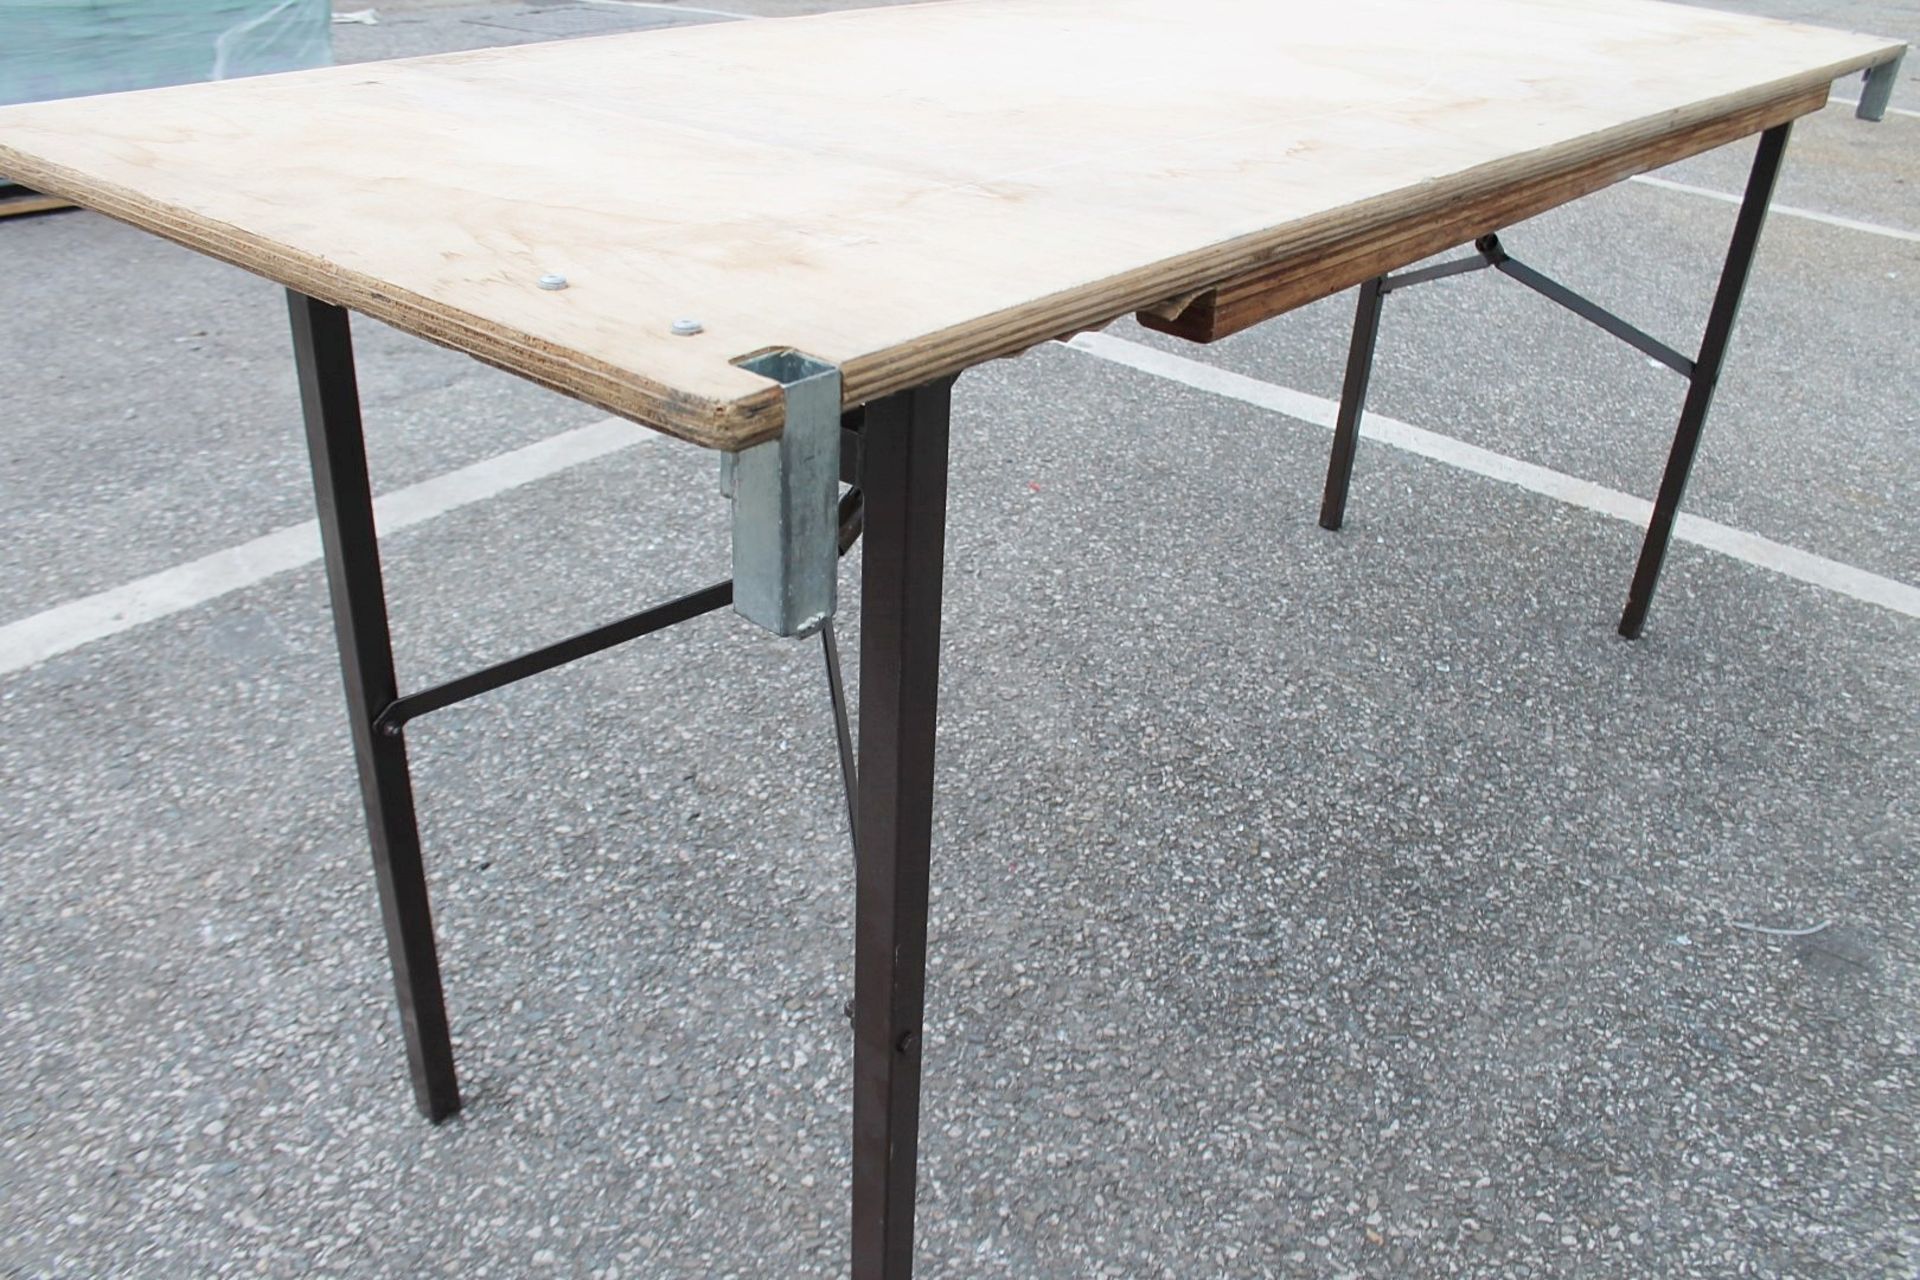 1 x Folding 6ft Wooden Topped Rectangular Trestle Table - Recently Removed From A Well-known - Image 3 of 6